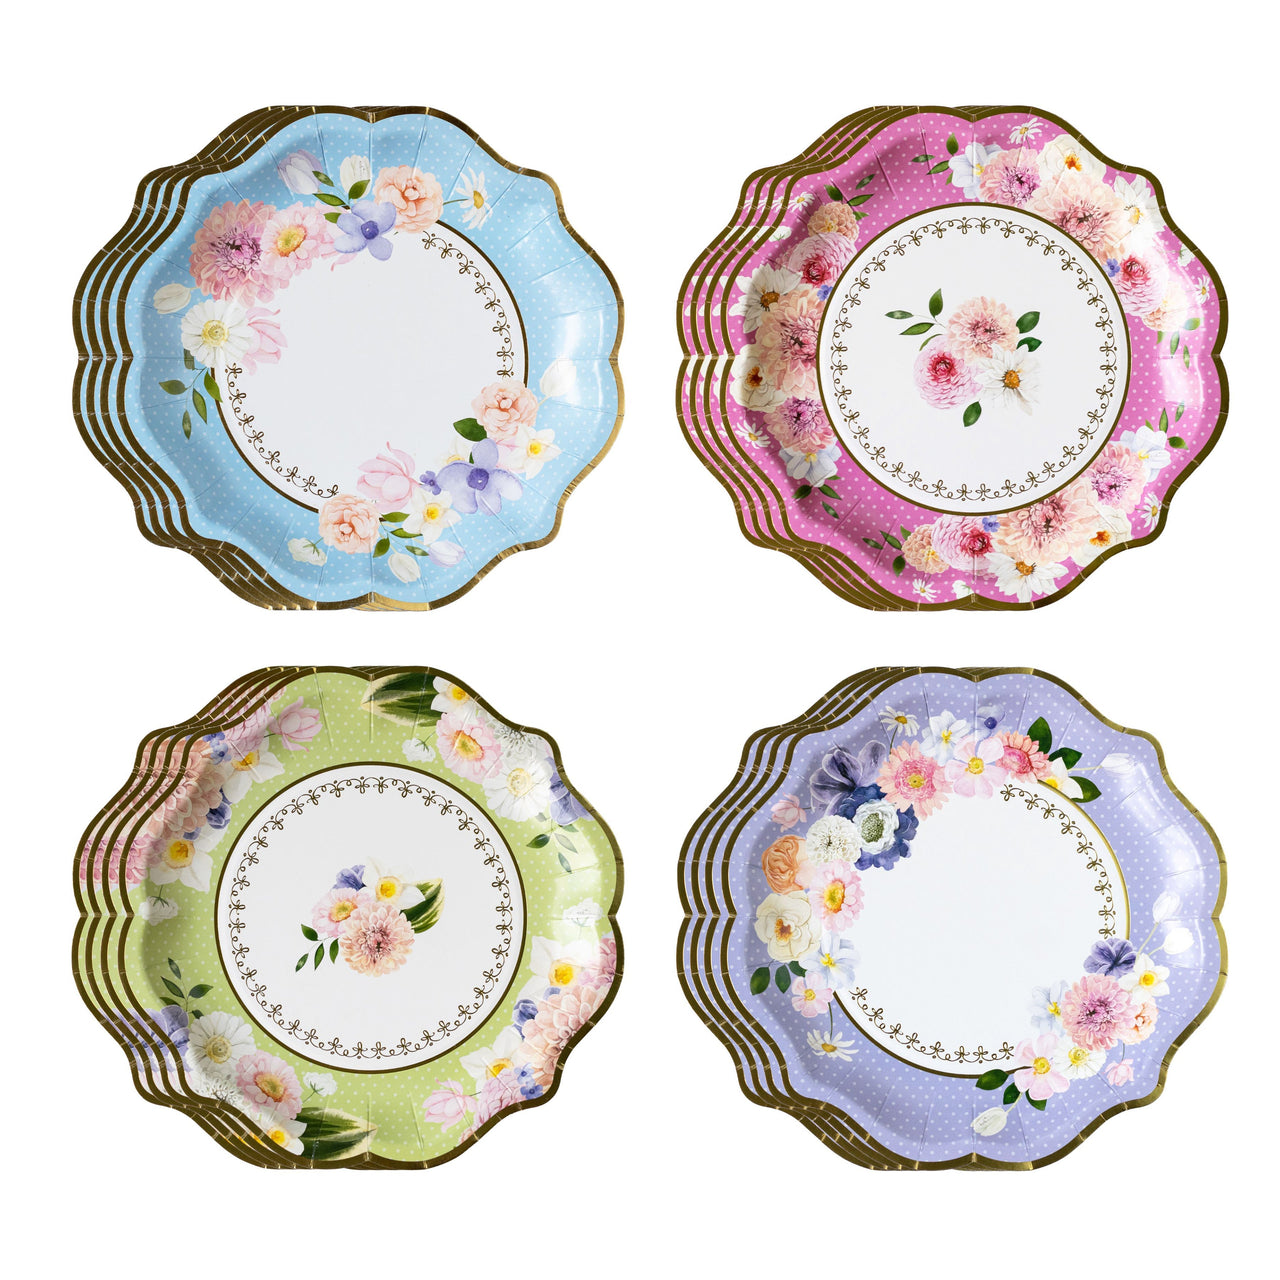 Tea Time Party 9" Premium Paper Plates - Assorted (Set of 16) Atlernate silo